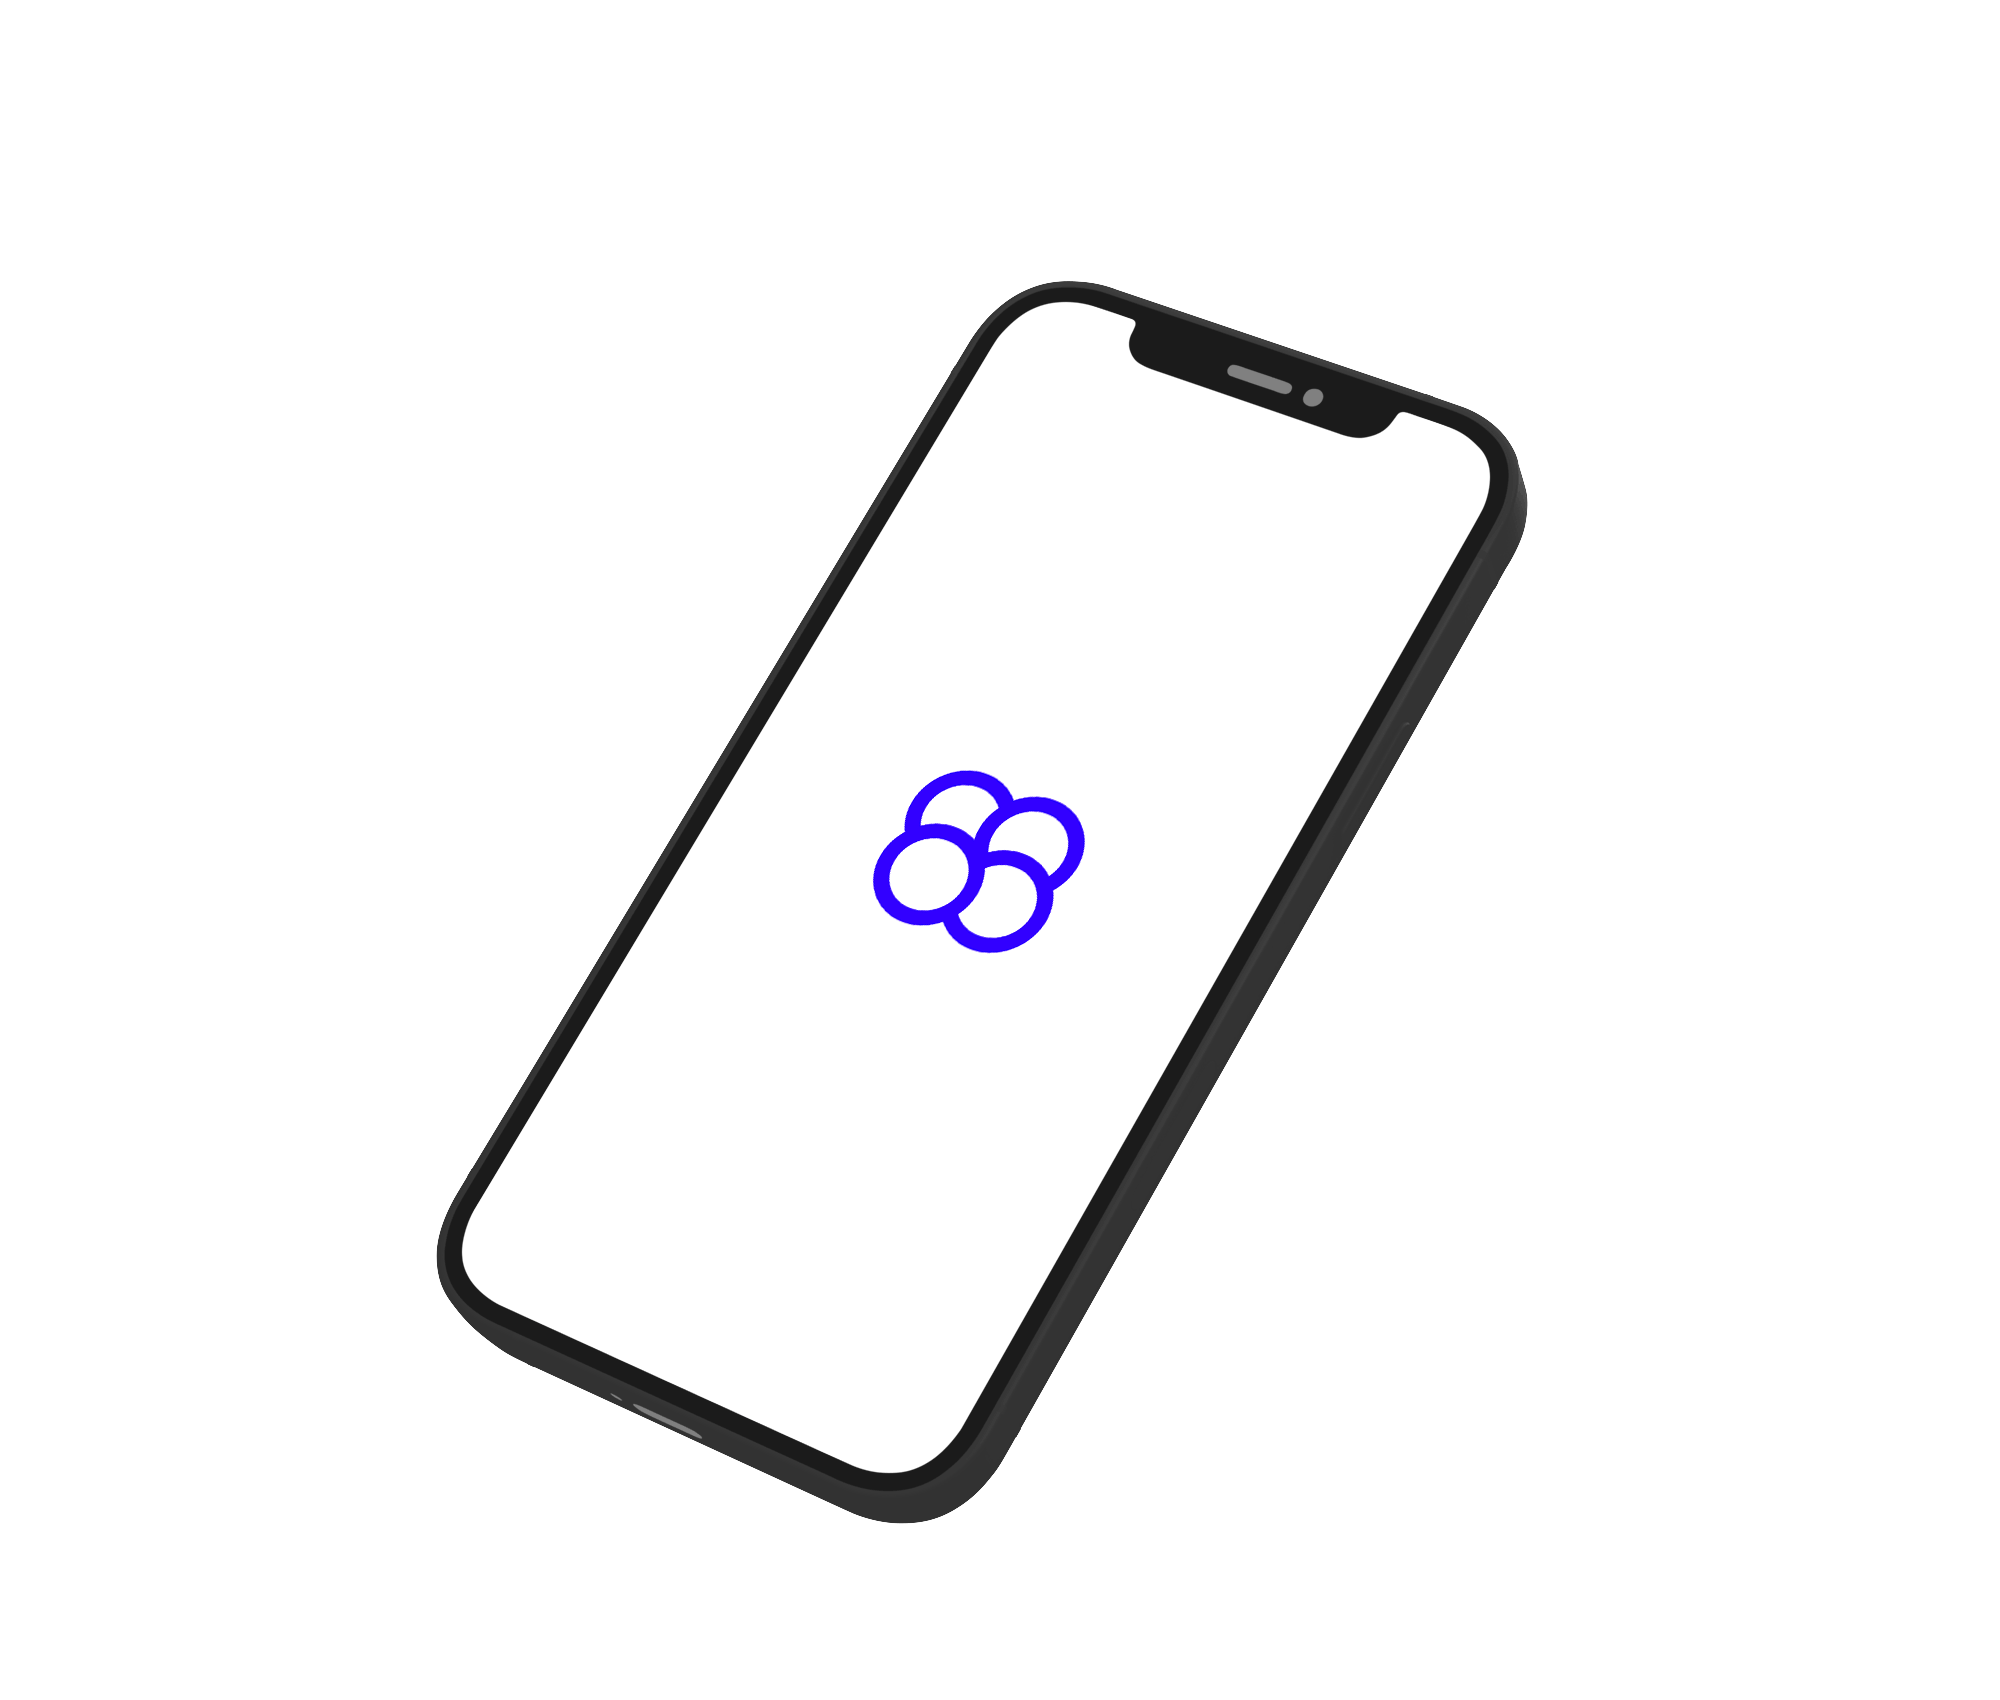 Animation showing an iPhone display with a blue mosaic logo enlarging in loop